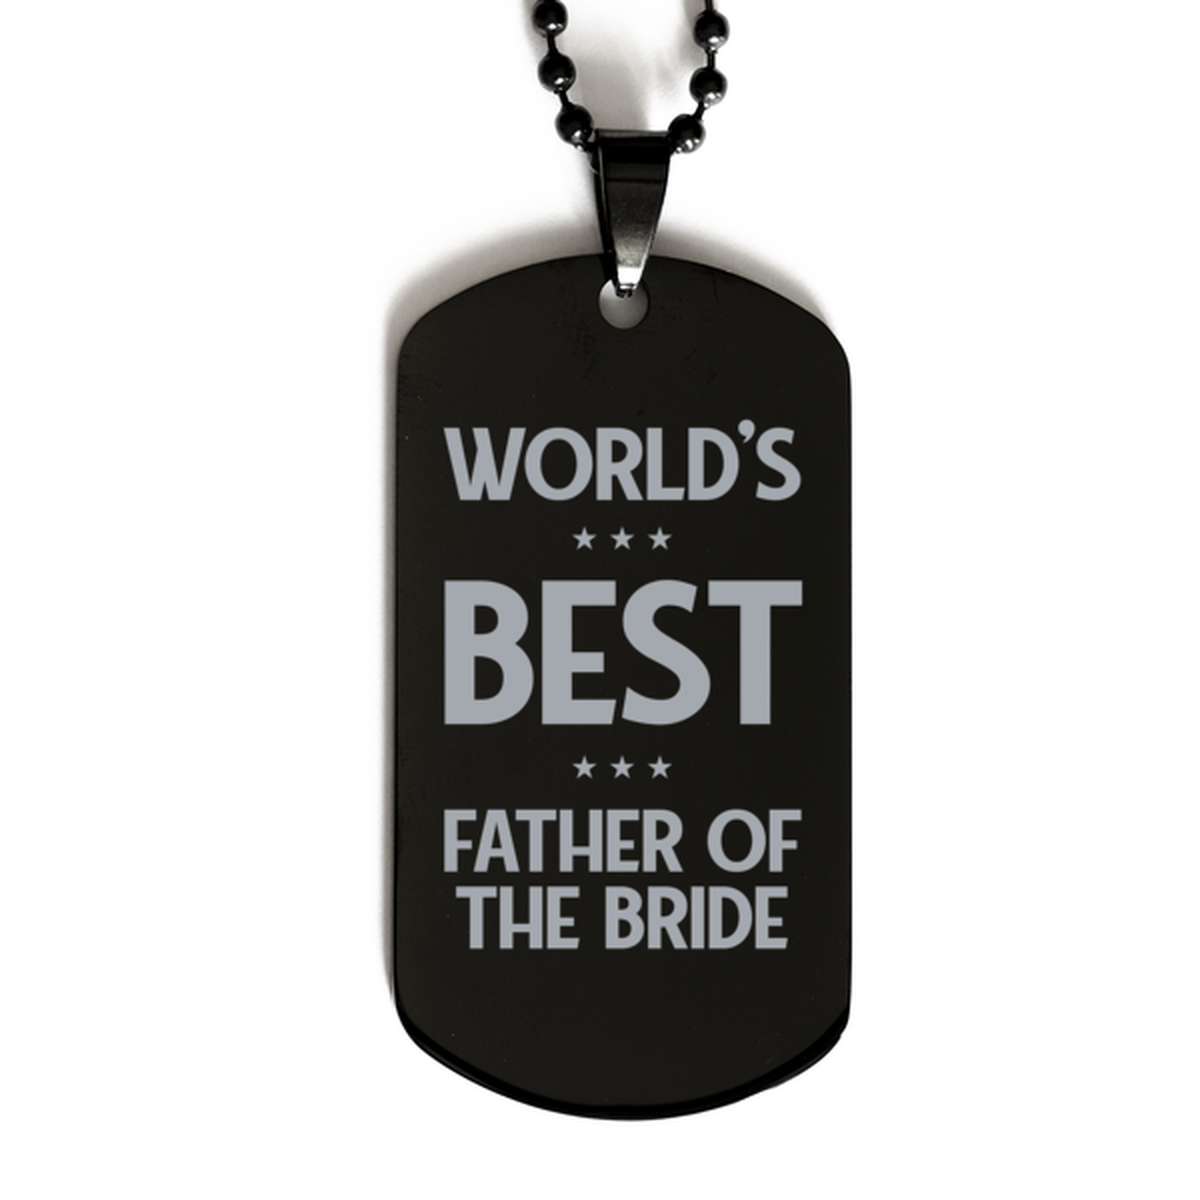 Worlds Best Father of the bride Gifts, Funny Black Engraved Dog Tag For Father of the bride, Birthday Presents For Men